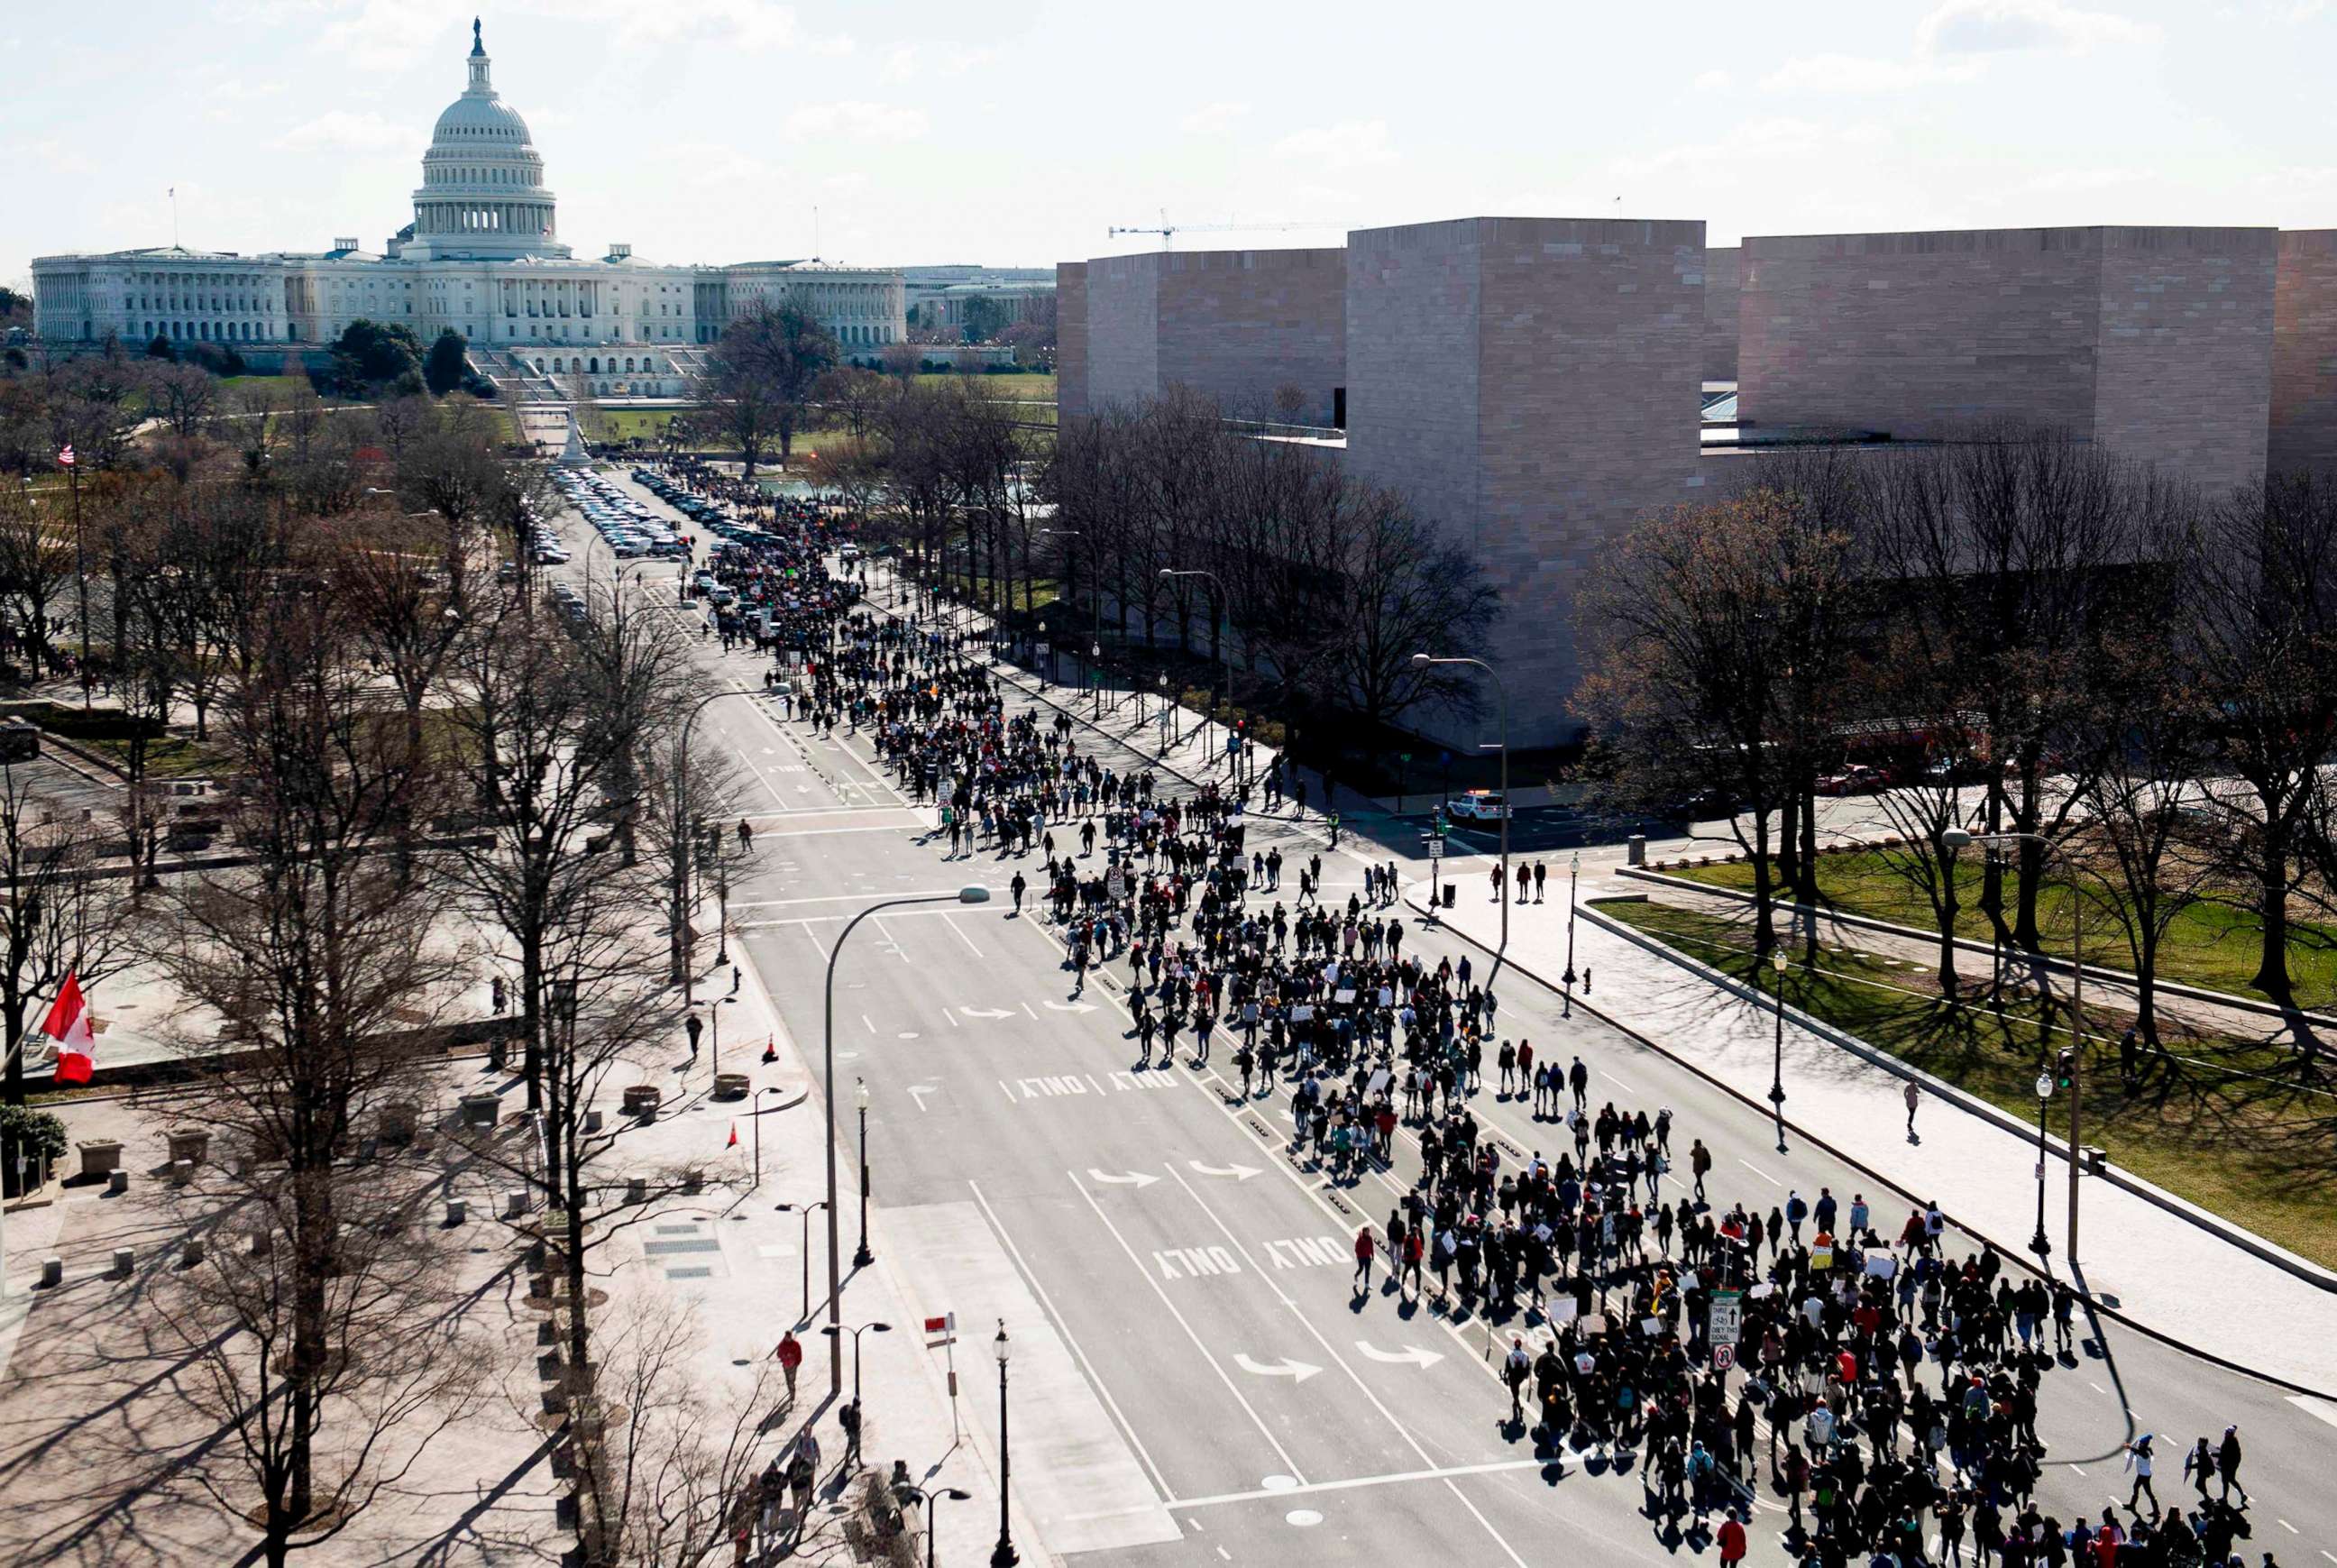 PHOTO: Thousands of local students march down Pennsylvania Avenue to the U.S. Capitol during a nationwide student walkout for gun control in Washington, D.C., March 14, 2018.